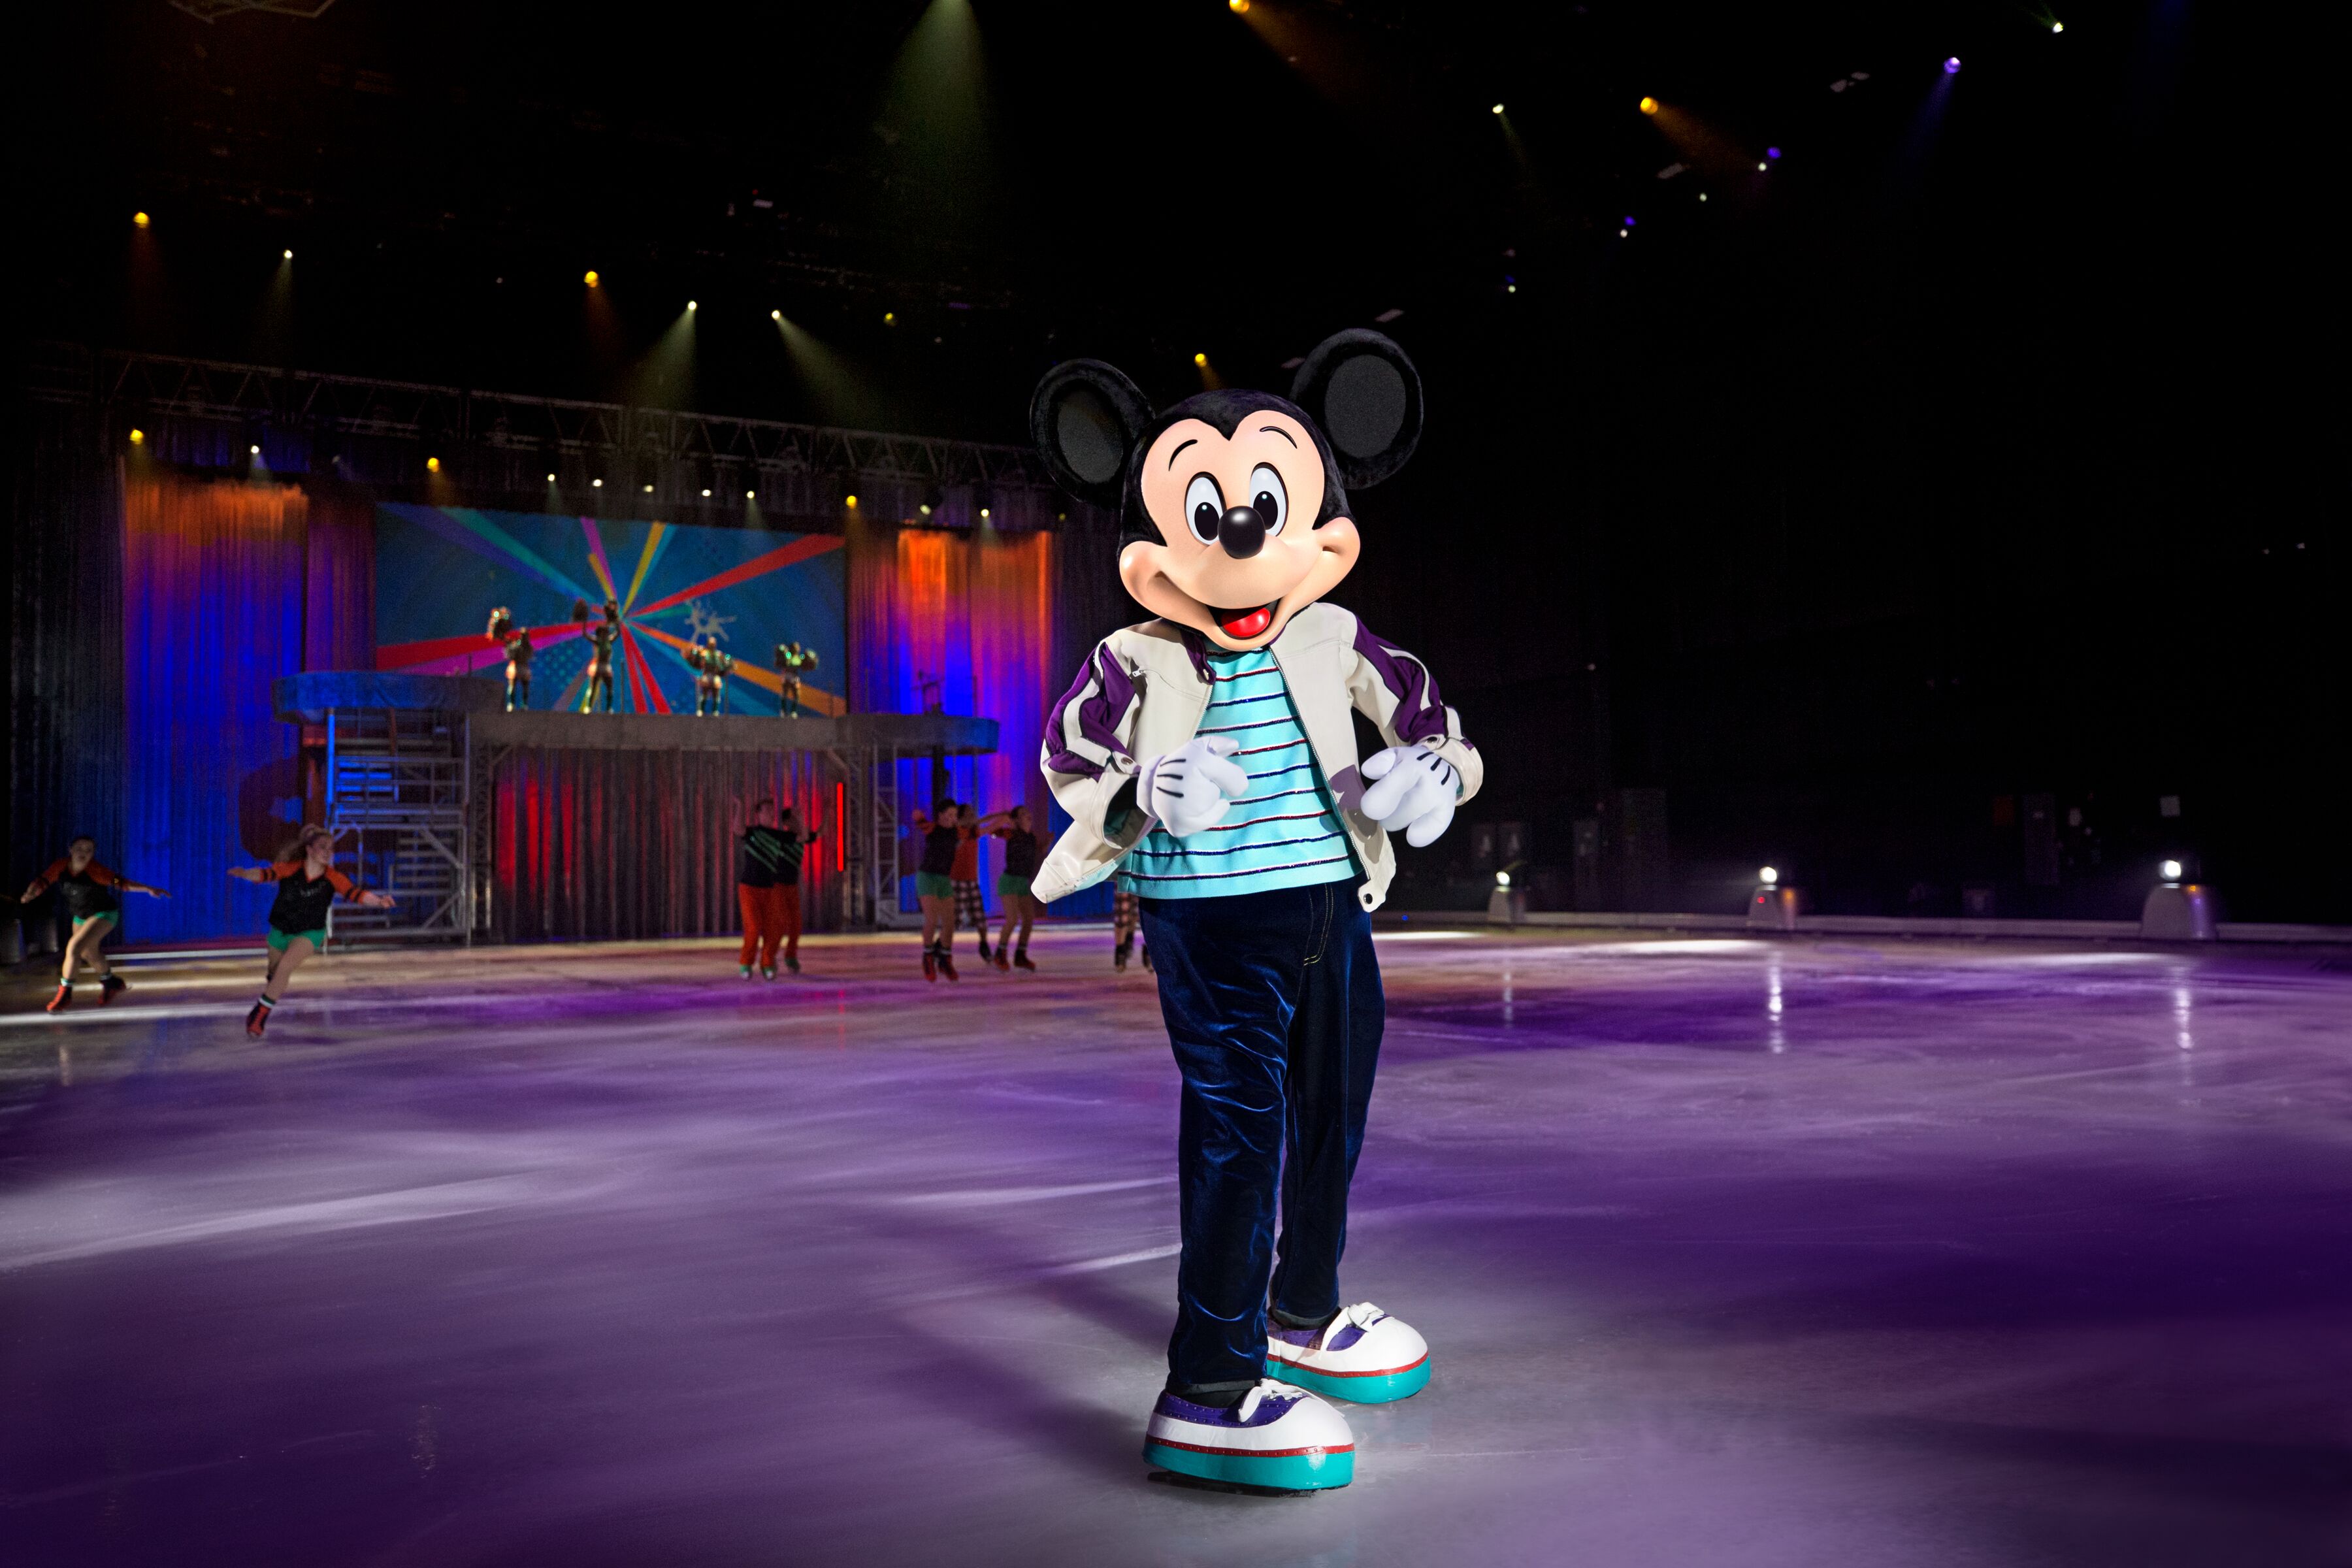 ‘Disney on Ice’ proves to be spectacular show for children and adults